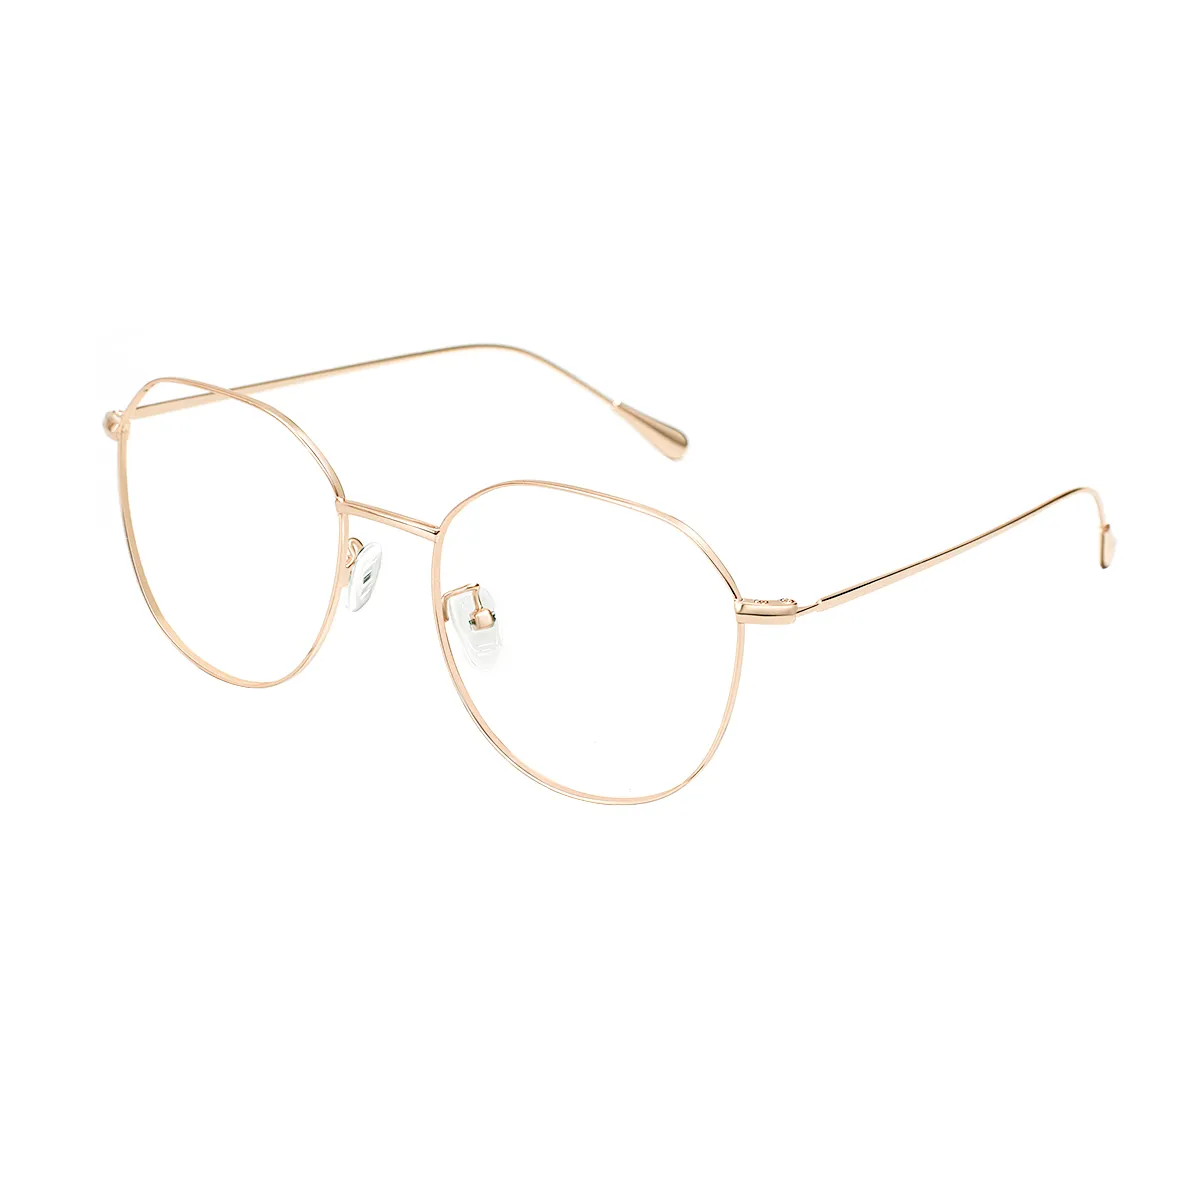 Classic Round Silver Eyeglasses for Women